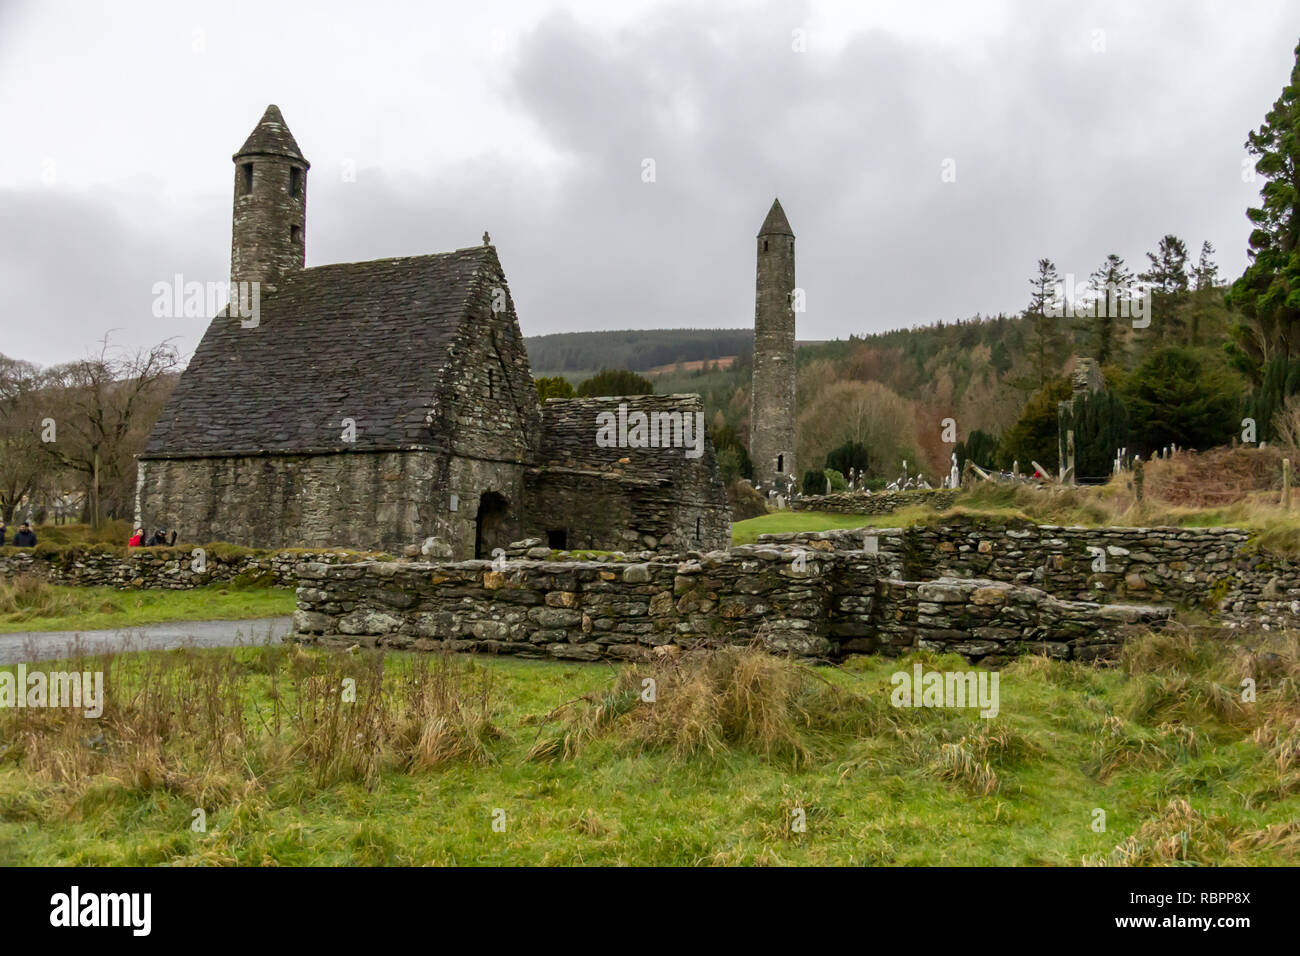 Saint Kevin's Kitchen and the Round Tower at the Glendalough Monastic Site in Wicklow, Ireland Stock Photo